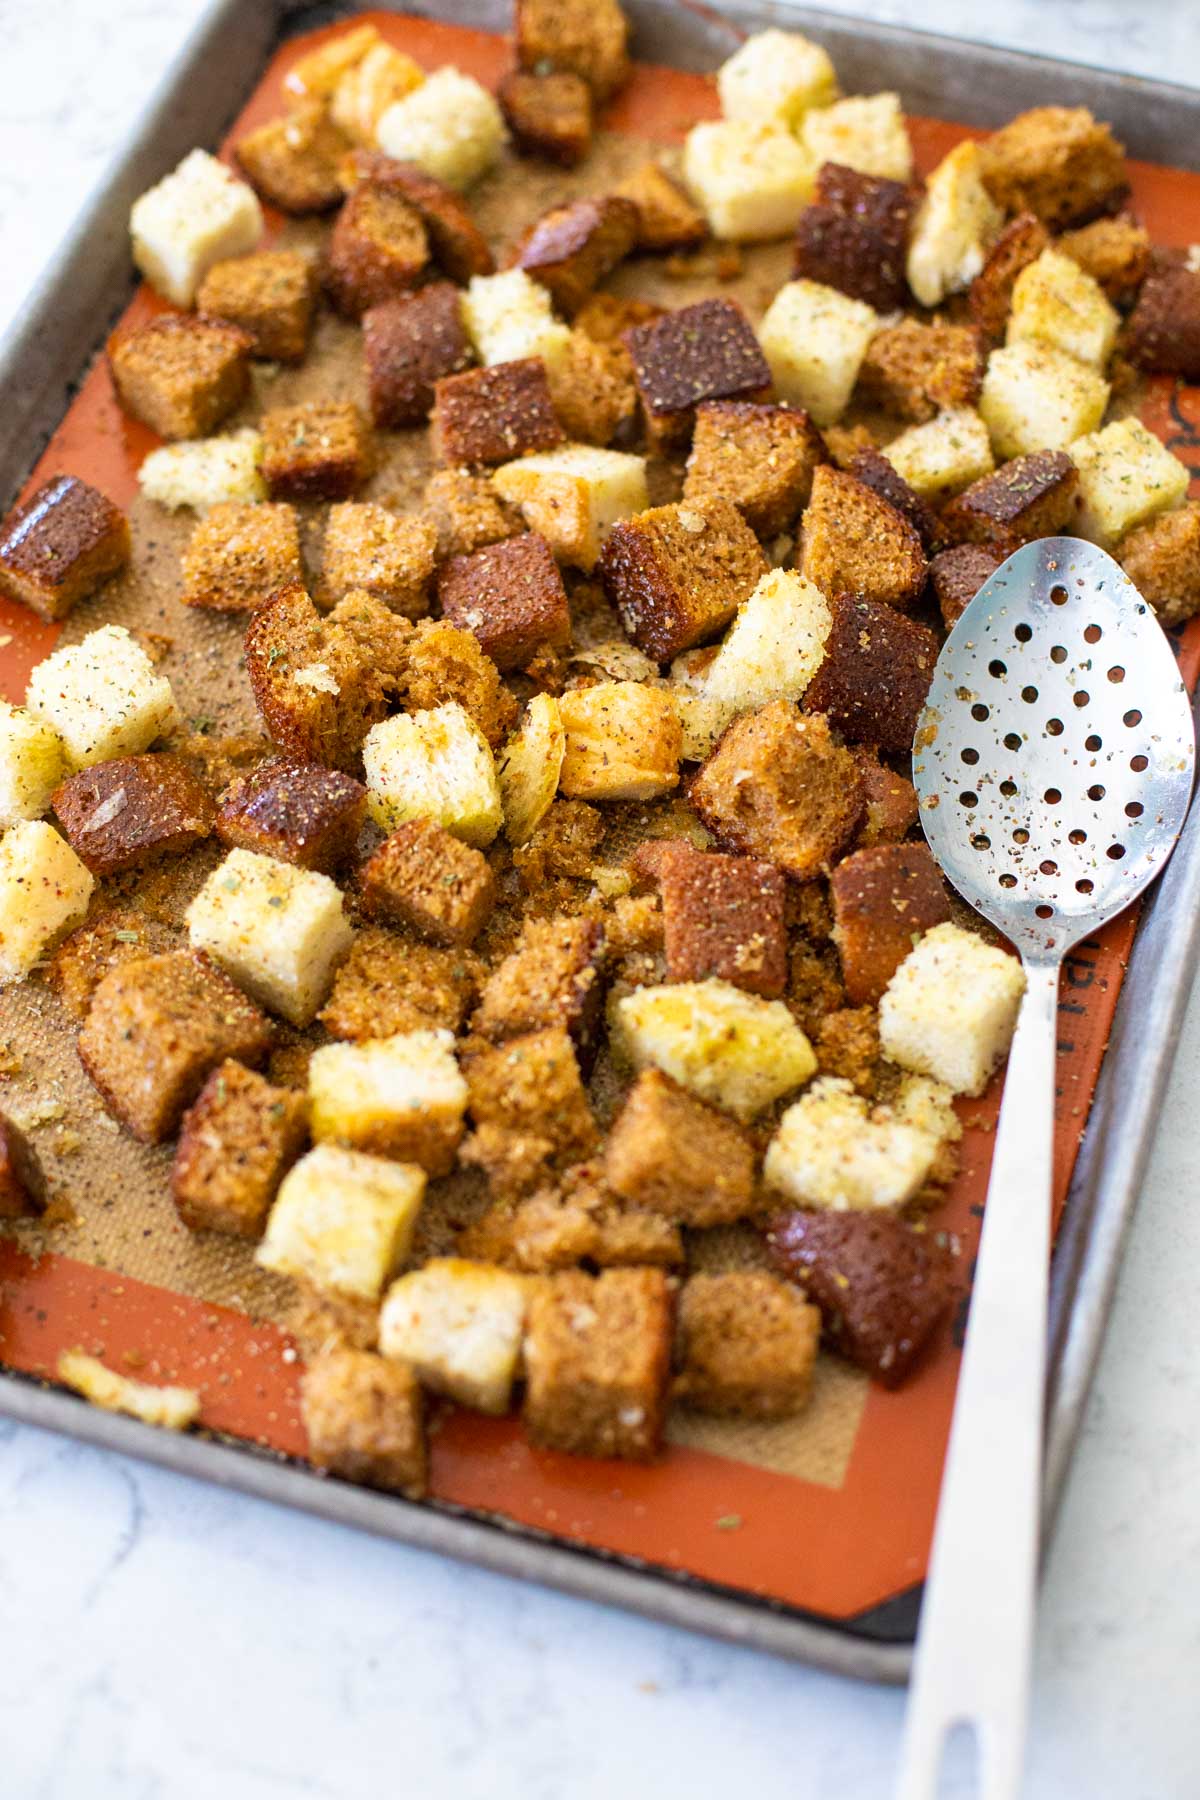 The croutons are spread out on a baking sheet next to a metal cooking spoon.